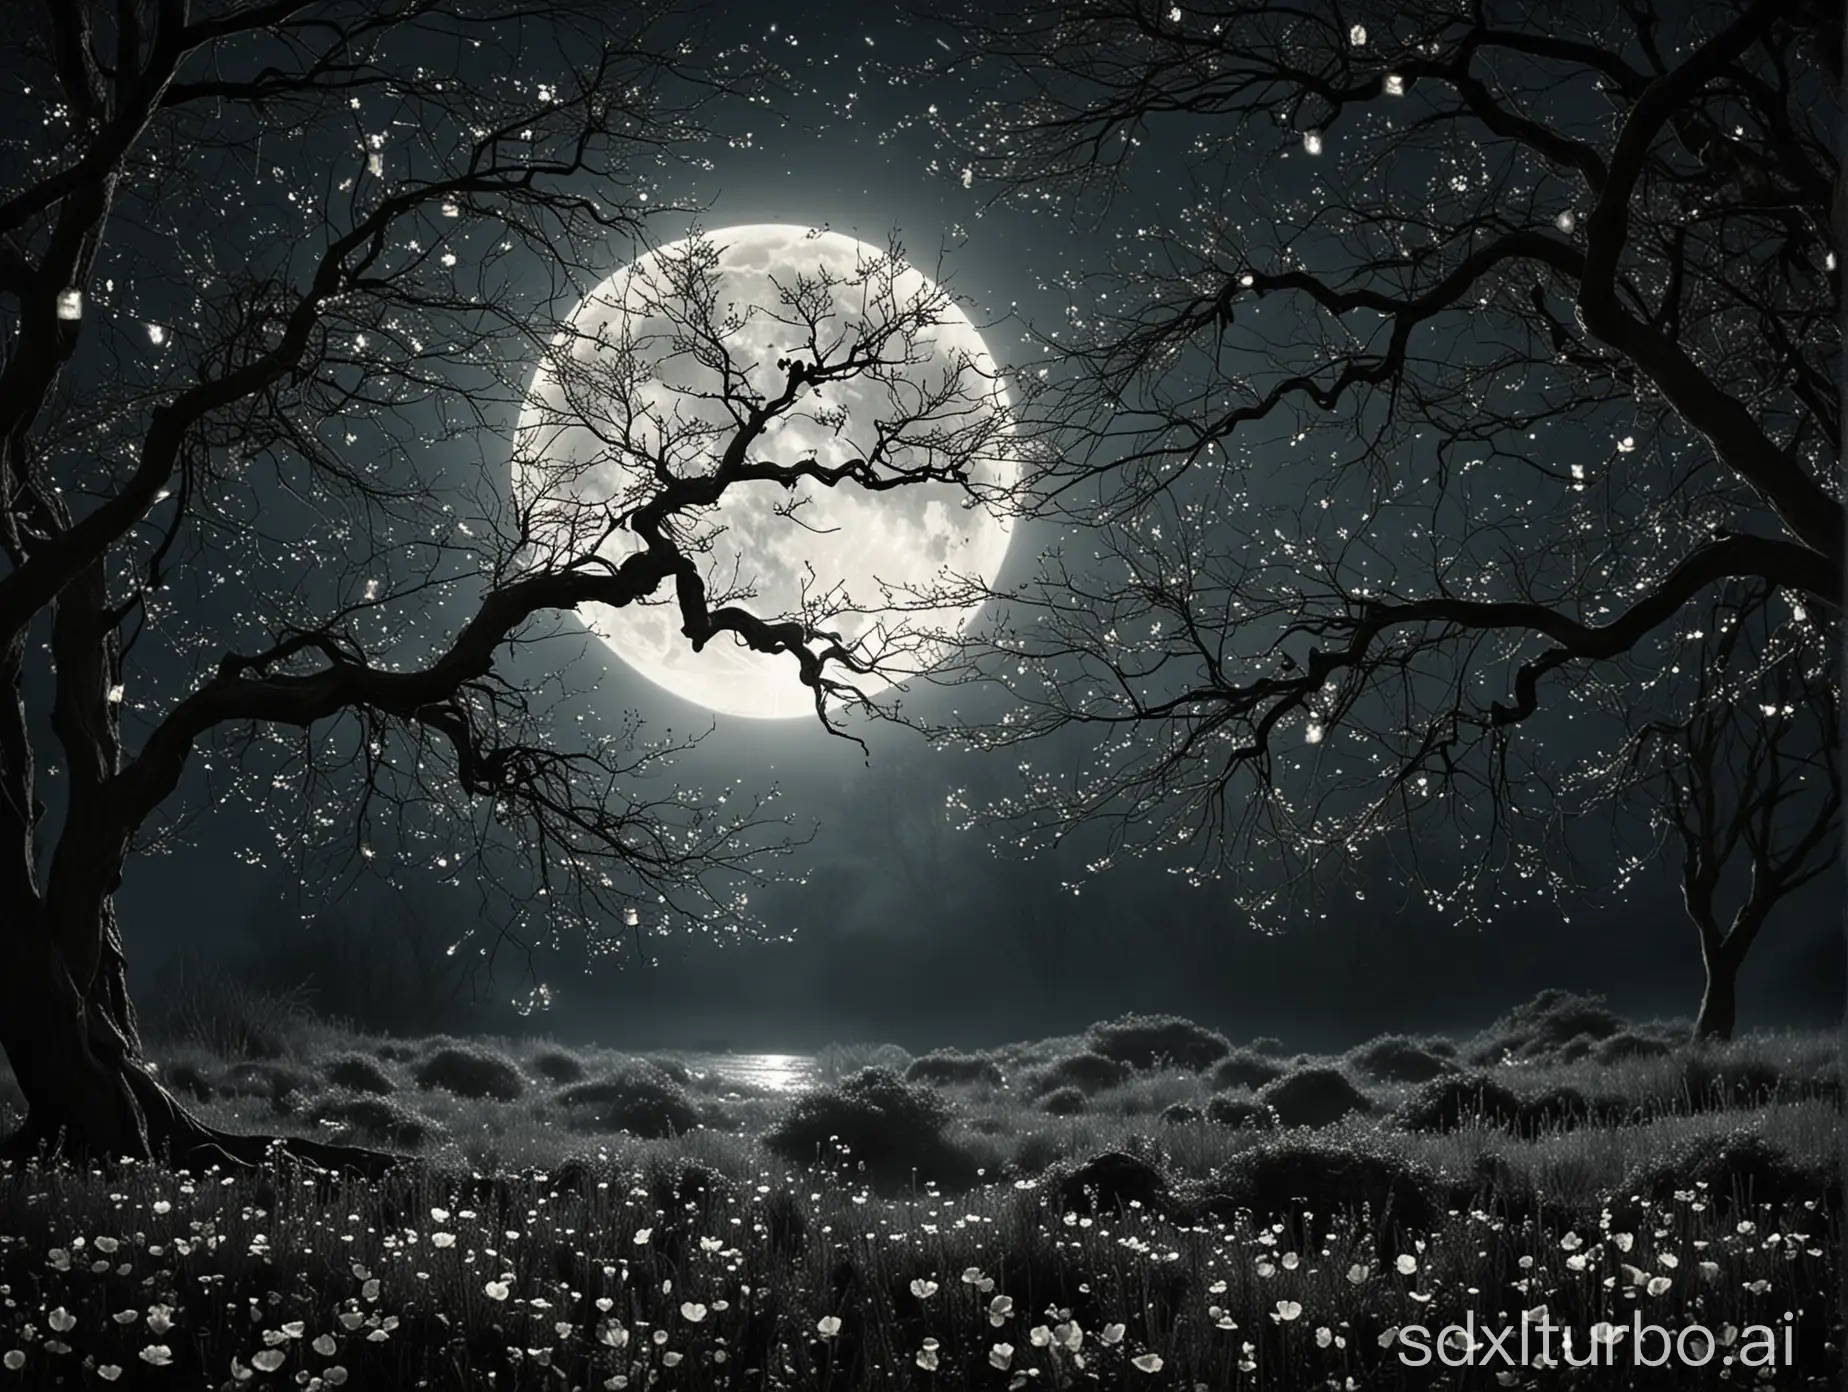 Moonlit-Serenity-Tranquil-Night-Under-the-Full-Moons-Glow